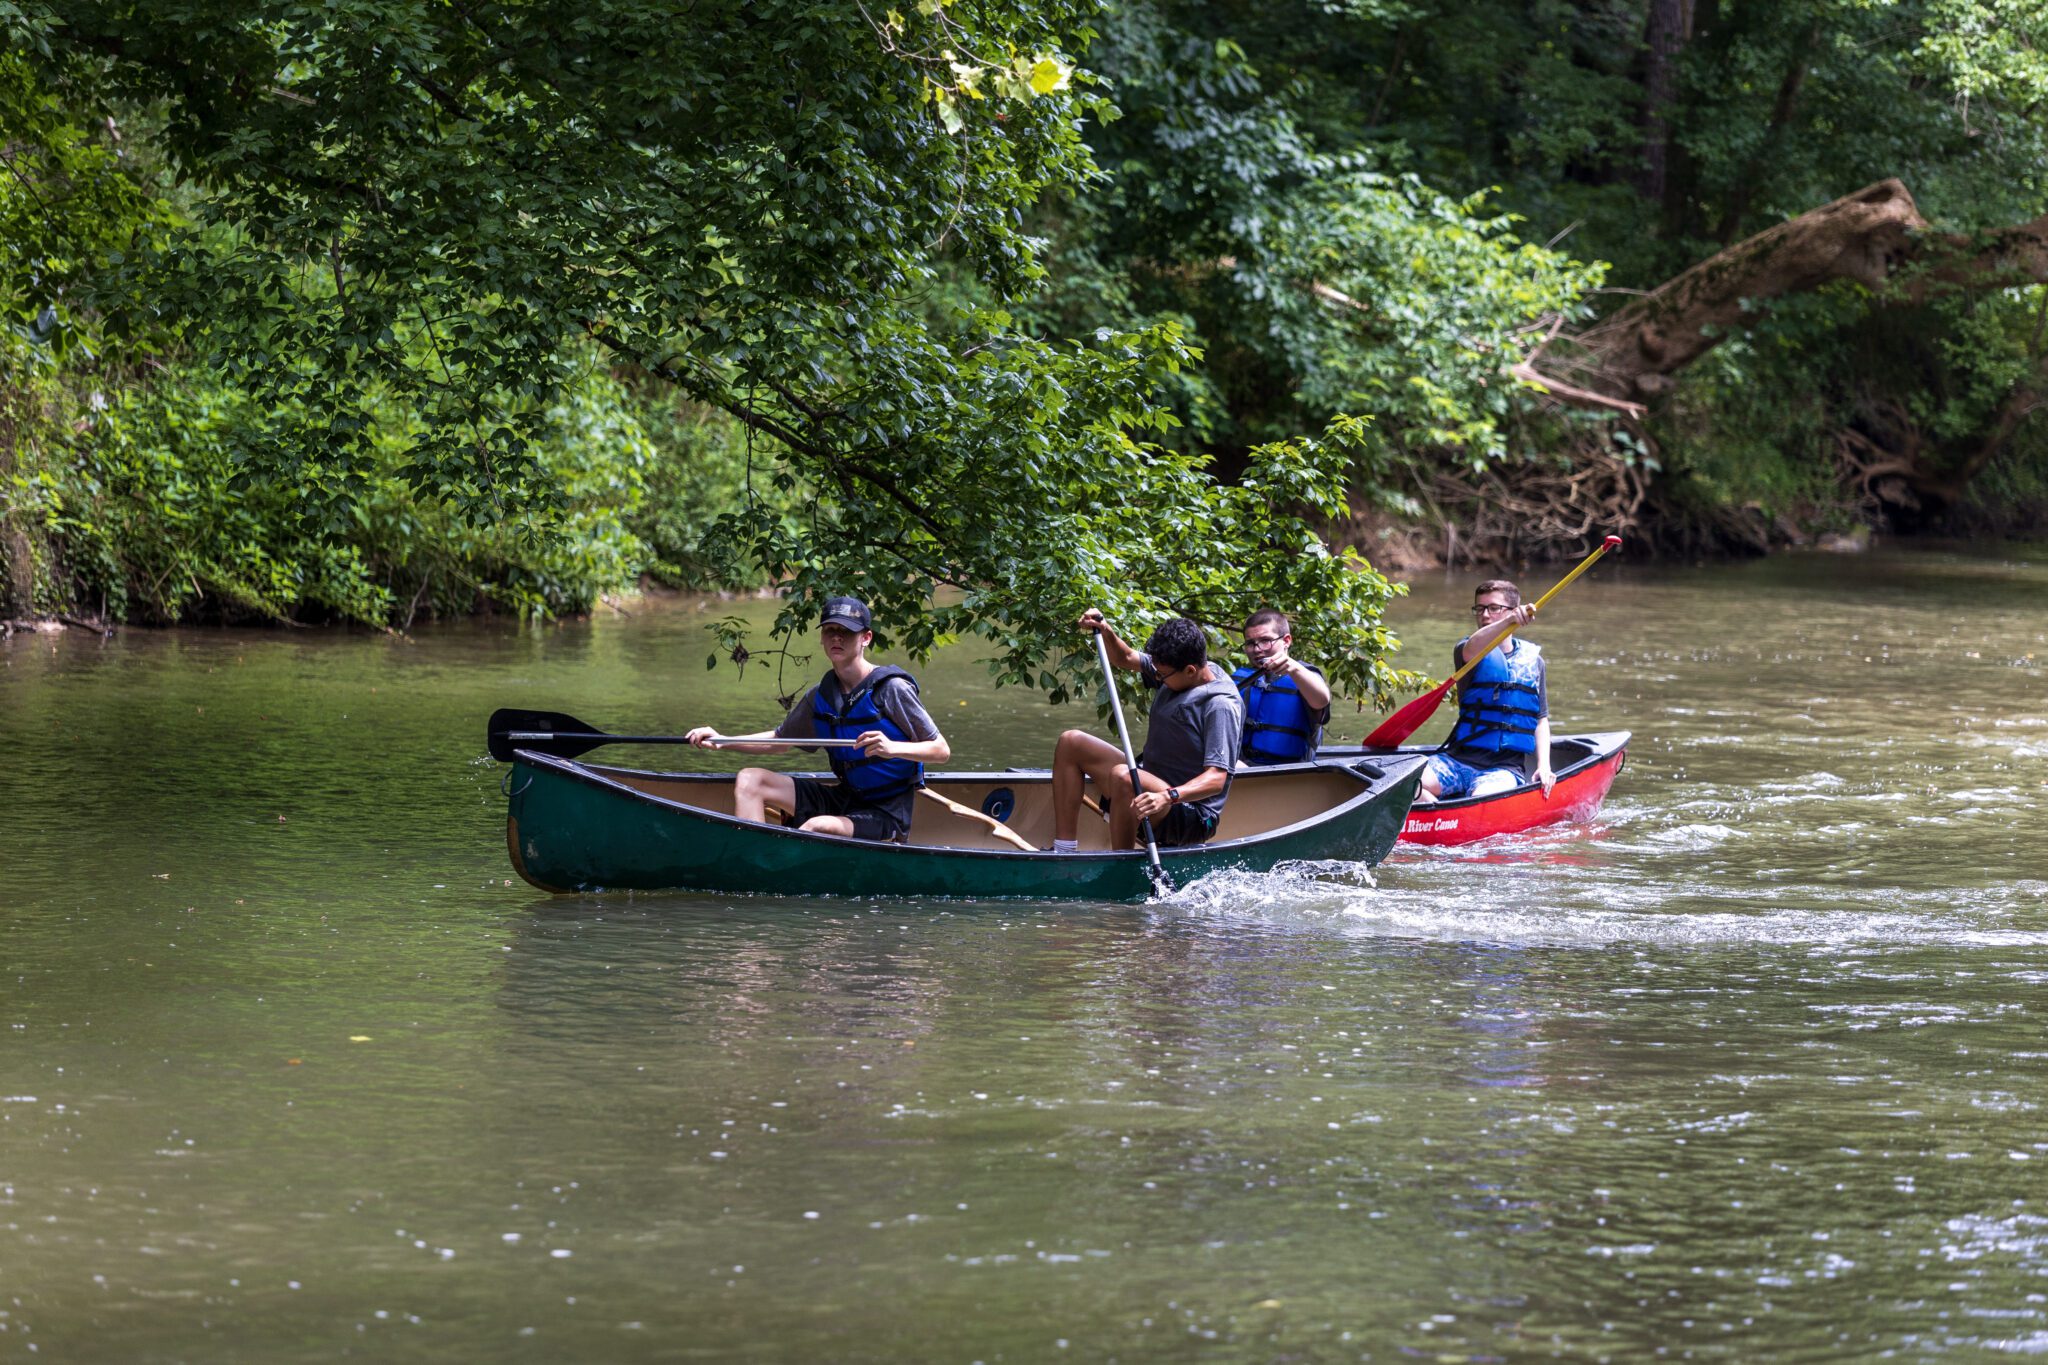 A group of people participating in the P.L.E.D.G.E. Leadership Program, navigating a river in a canoe.